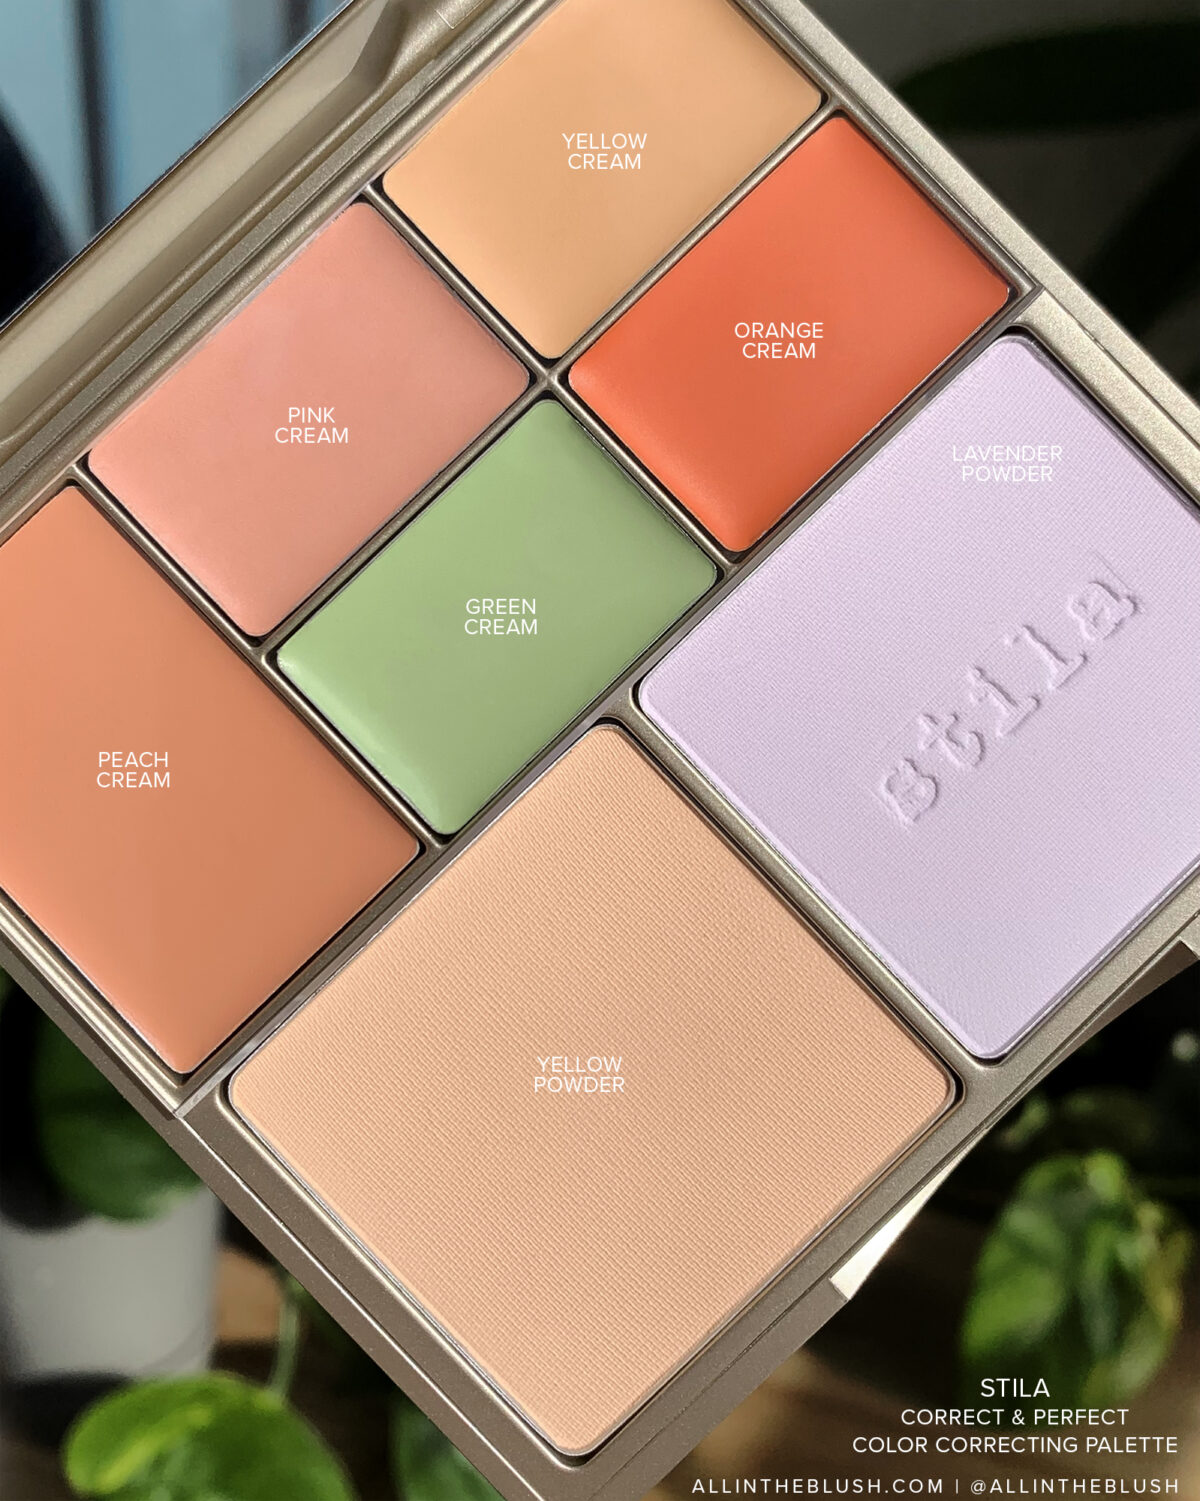 Stila Correct and Perfect All-In-One Color Correcting Palette Review